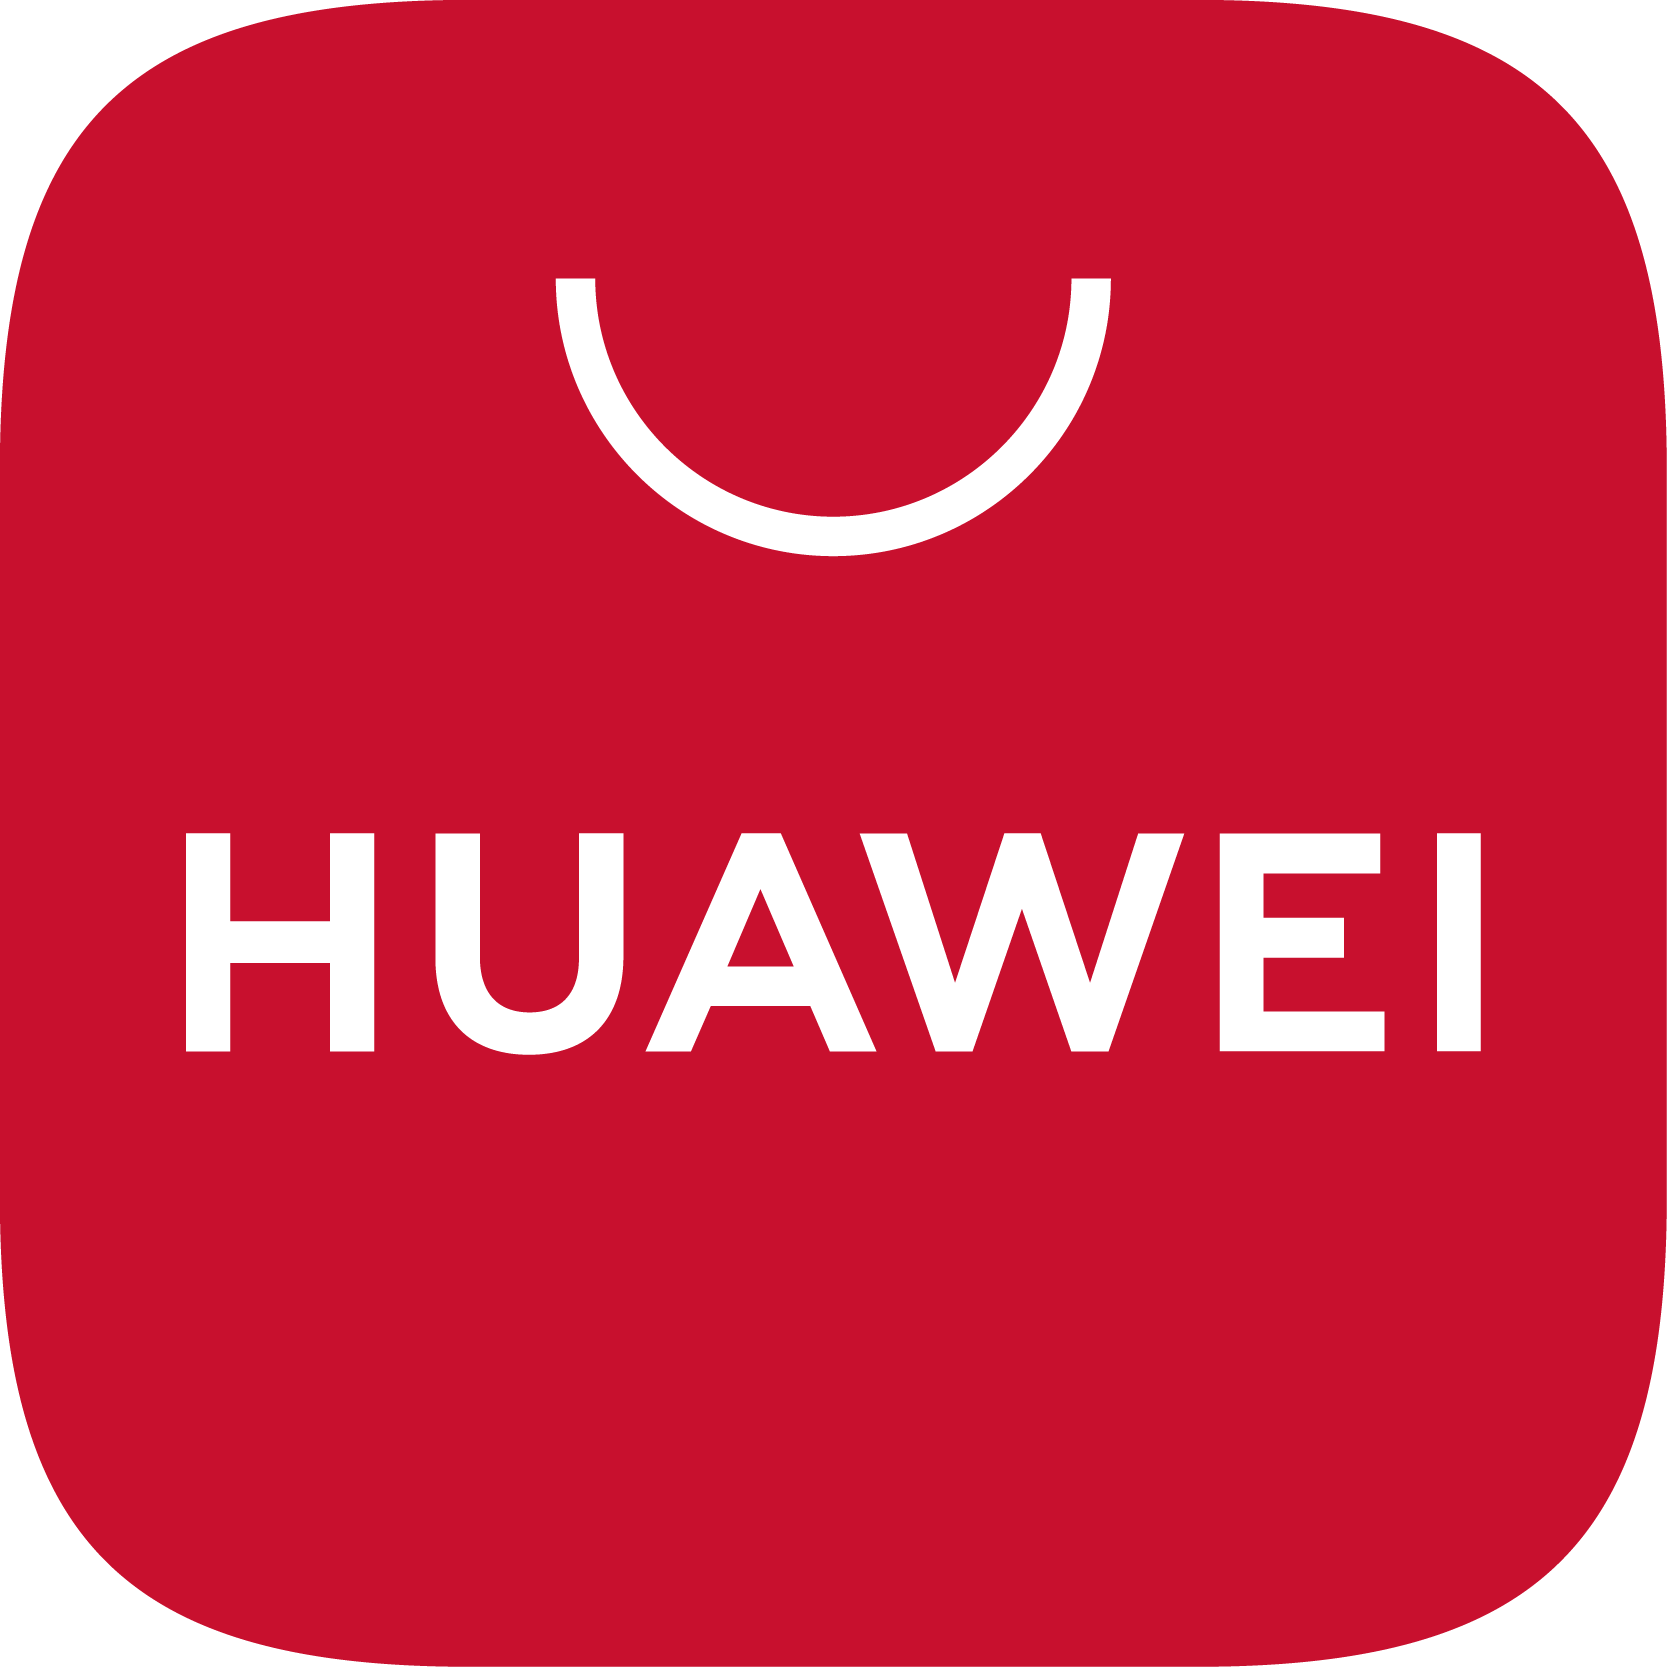 Access HUAWEI exclusive apps